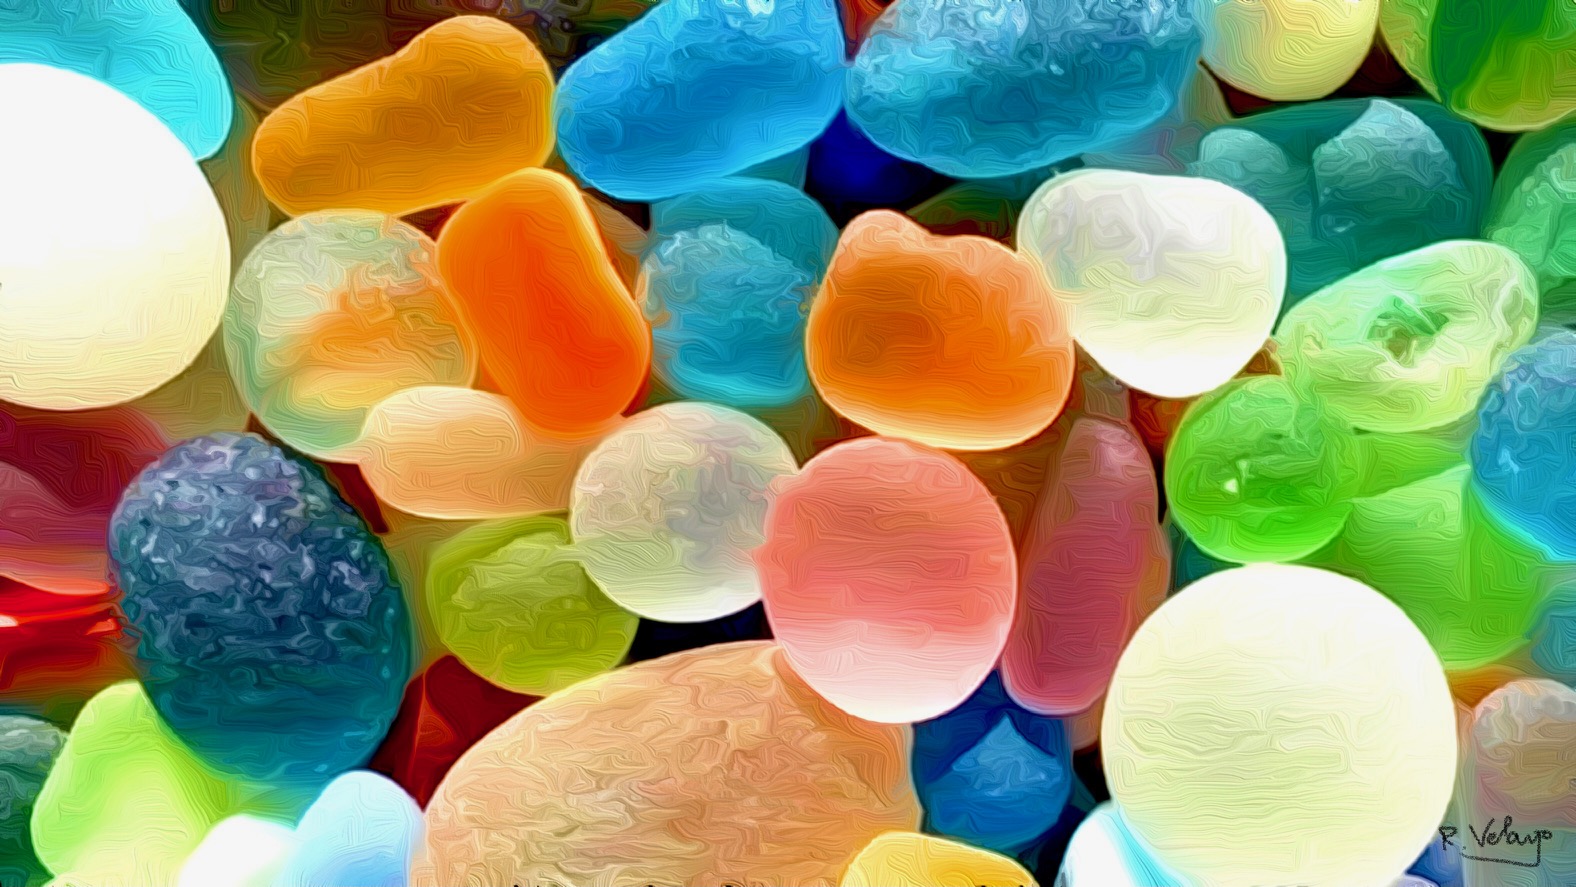 "STONES IN A MYRIAD OF COLORS" [Created: 3/31/2021]